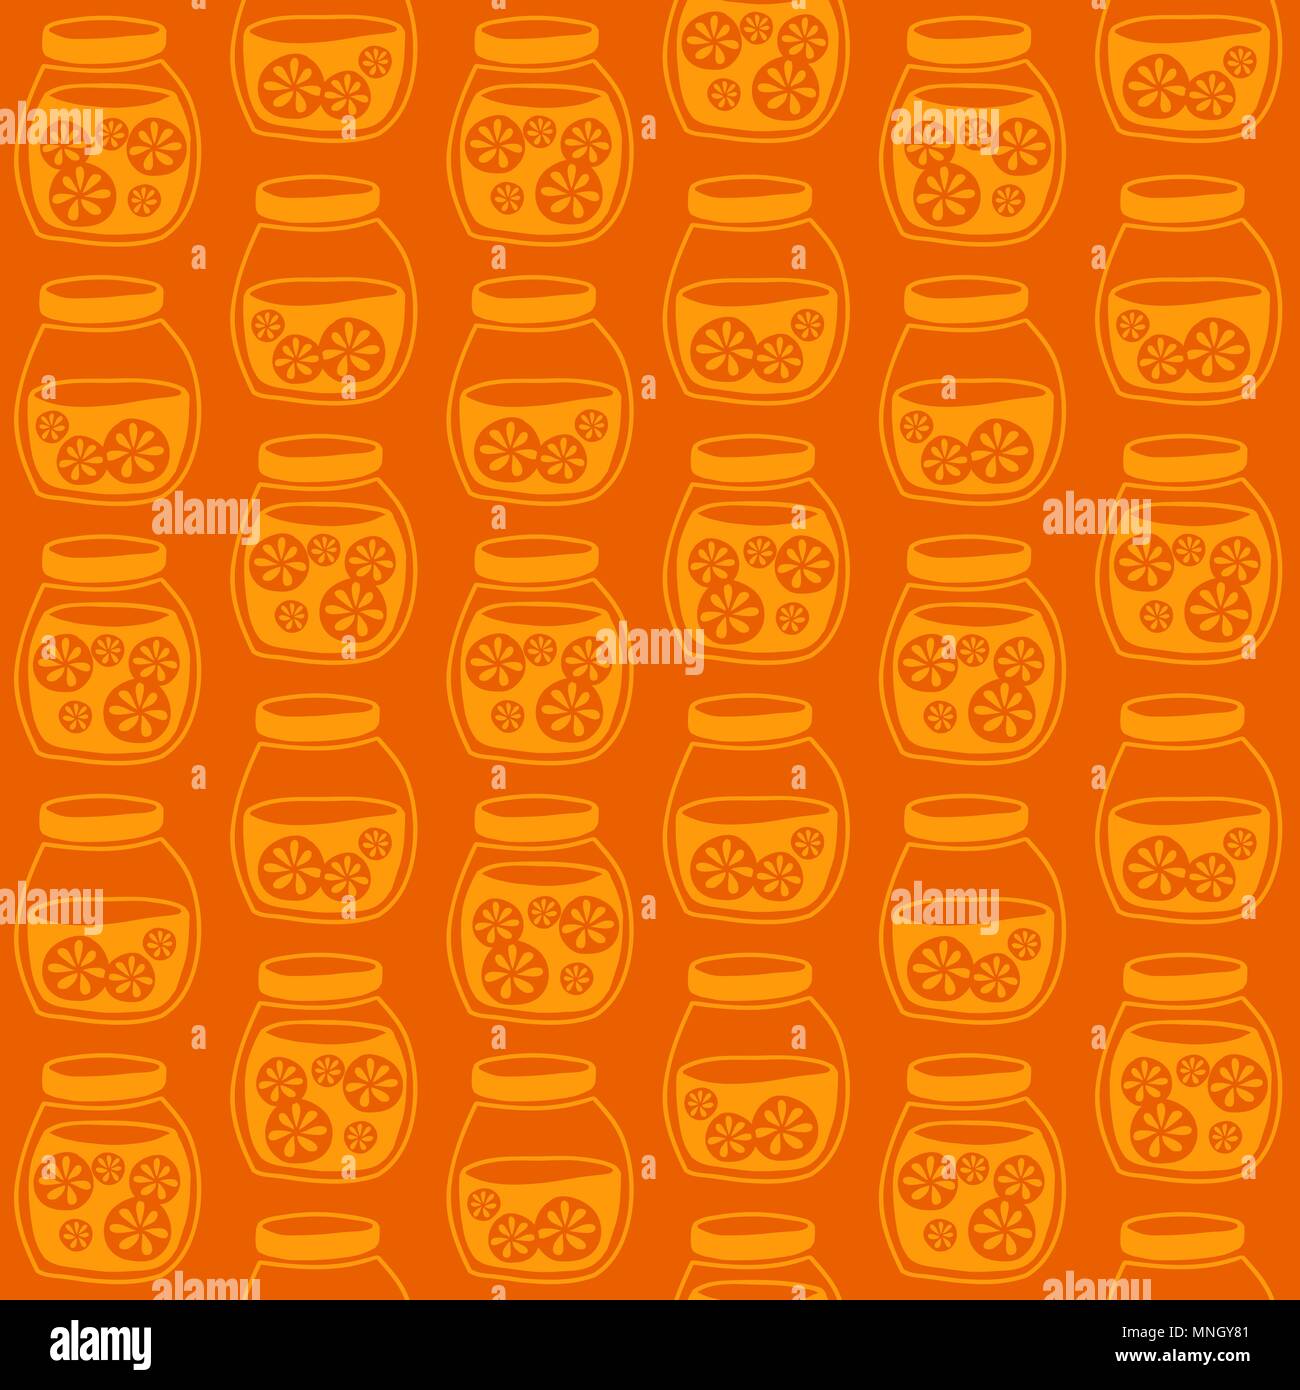 Funny seamless pattern with a colorful citrus jam jars. Plain shadeless background with oranges for decoration or background. Stock Vector